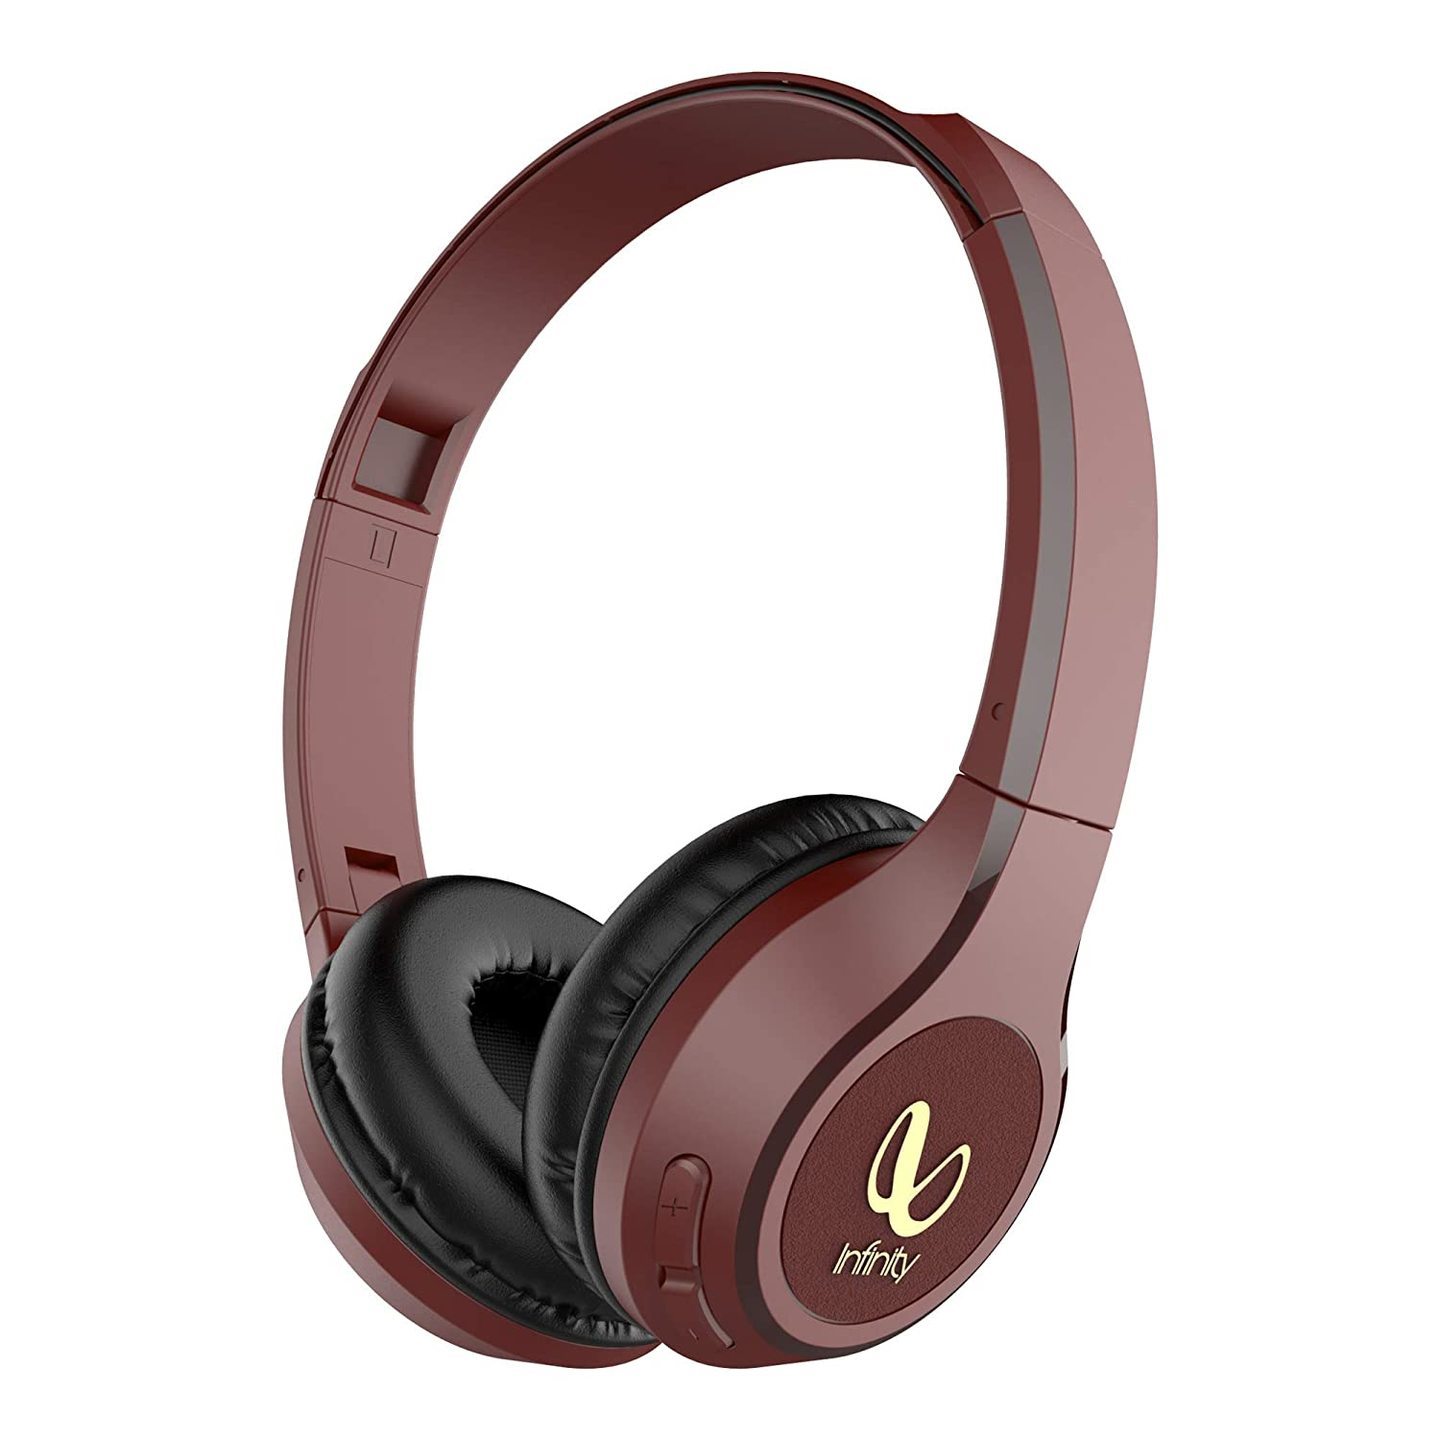 Infinity (JBL) Glide 500 Wireless Headphones with 20 Hours Playtime (Quick Charge), Deep Bass and Dual Equalizer (Passion Red)